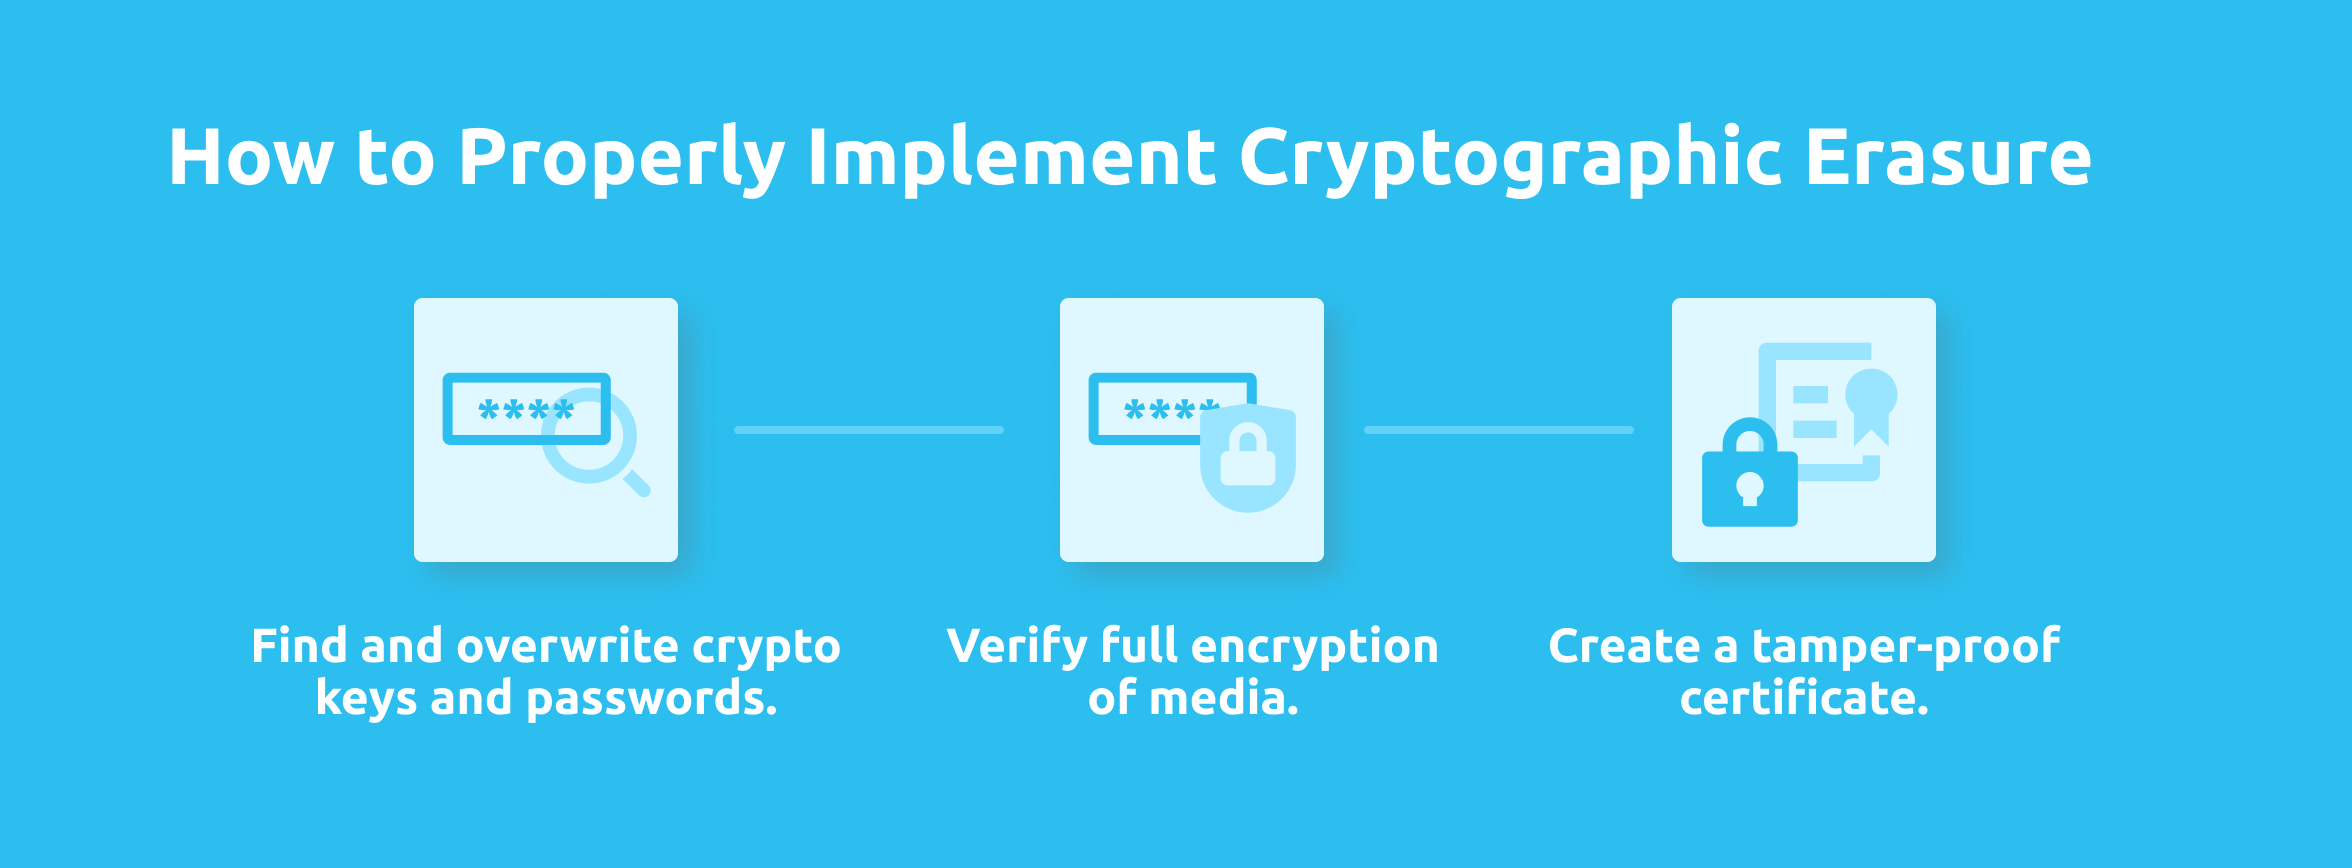 Visual of How to Properly Implement Cryptographic Erasure